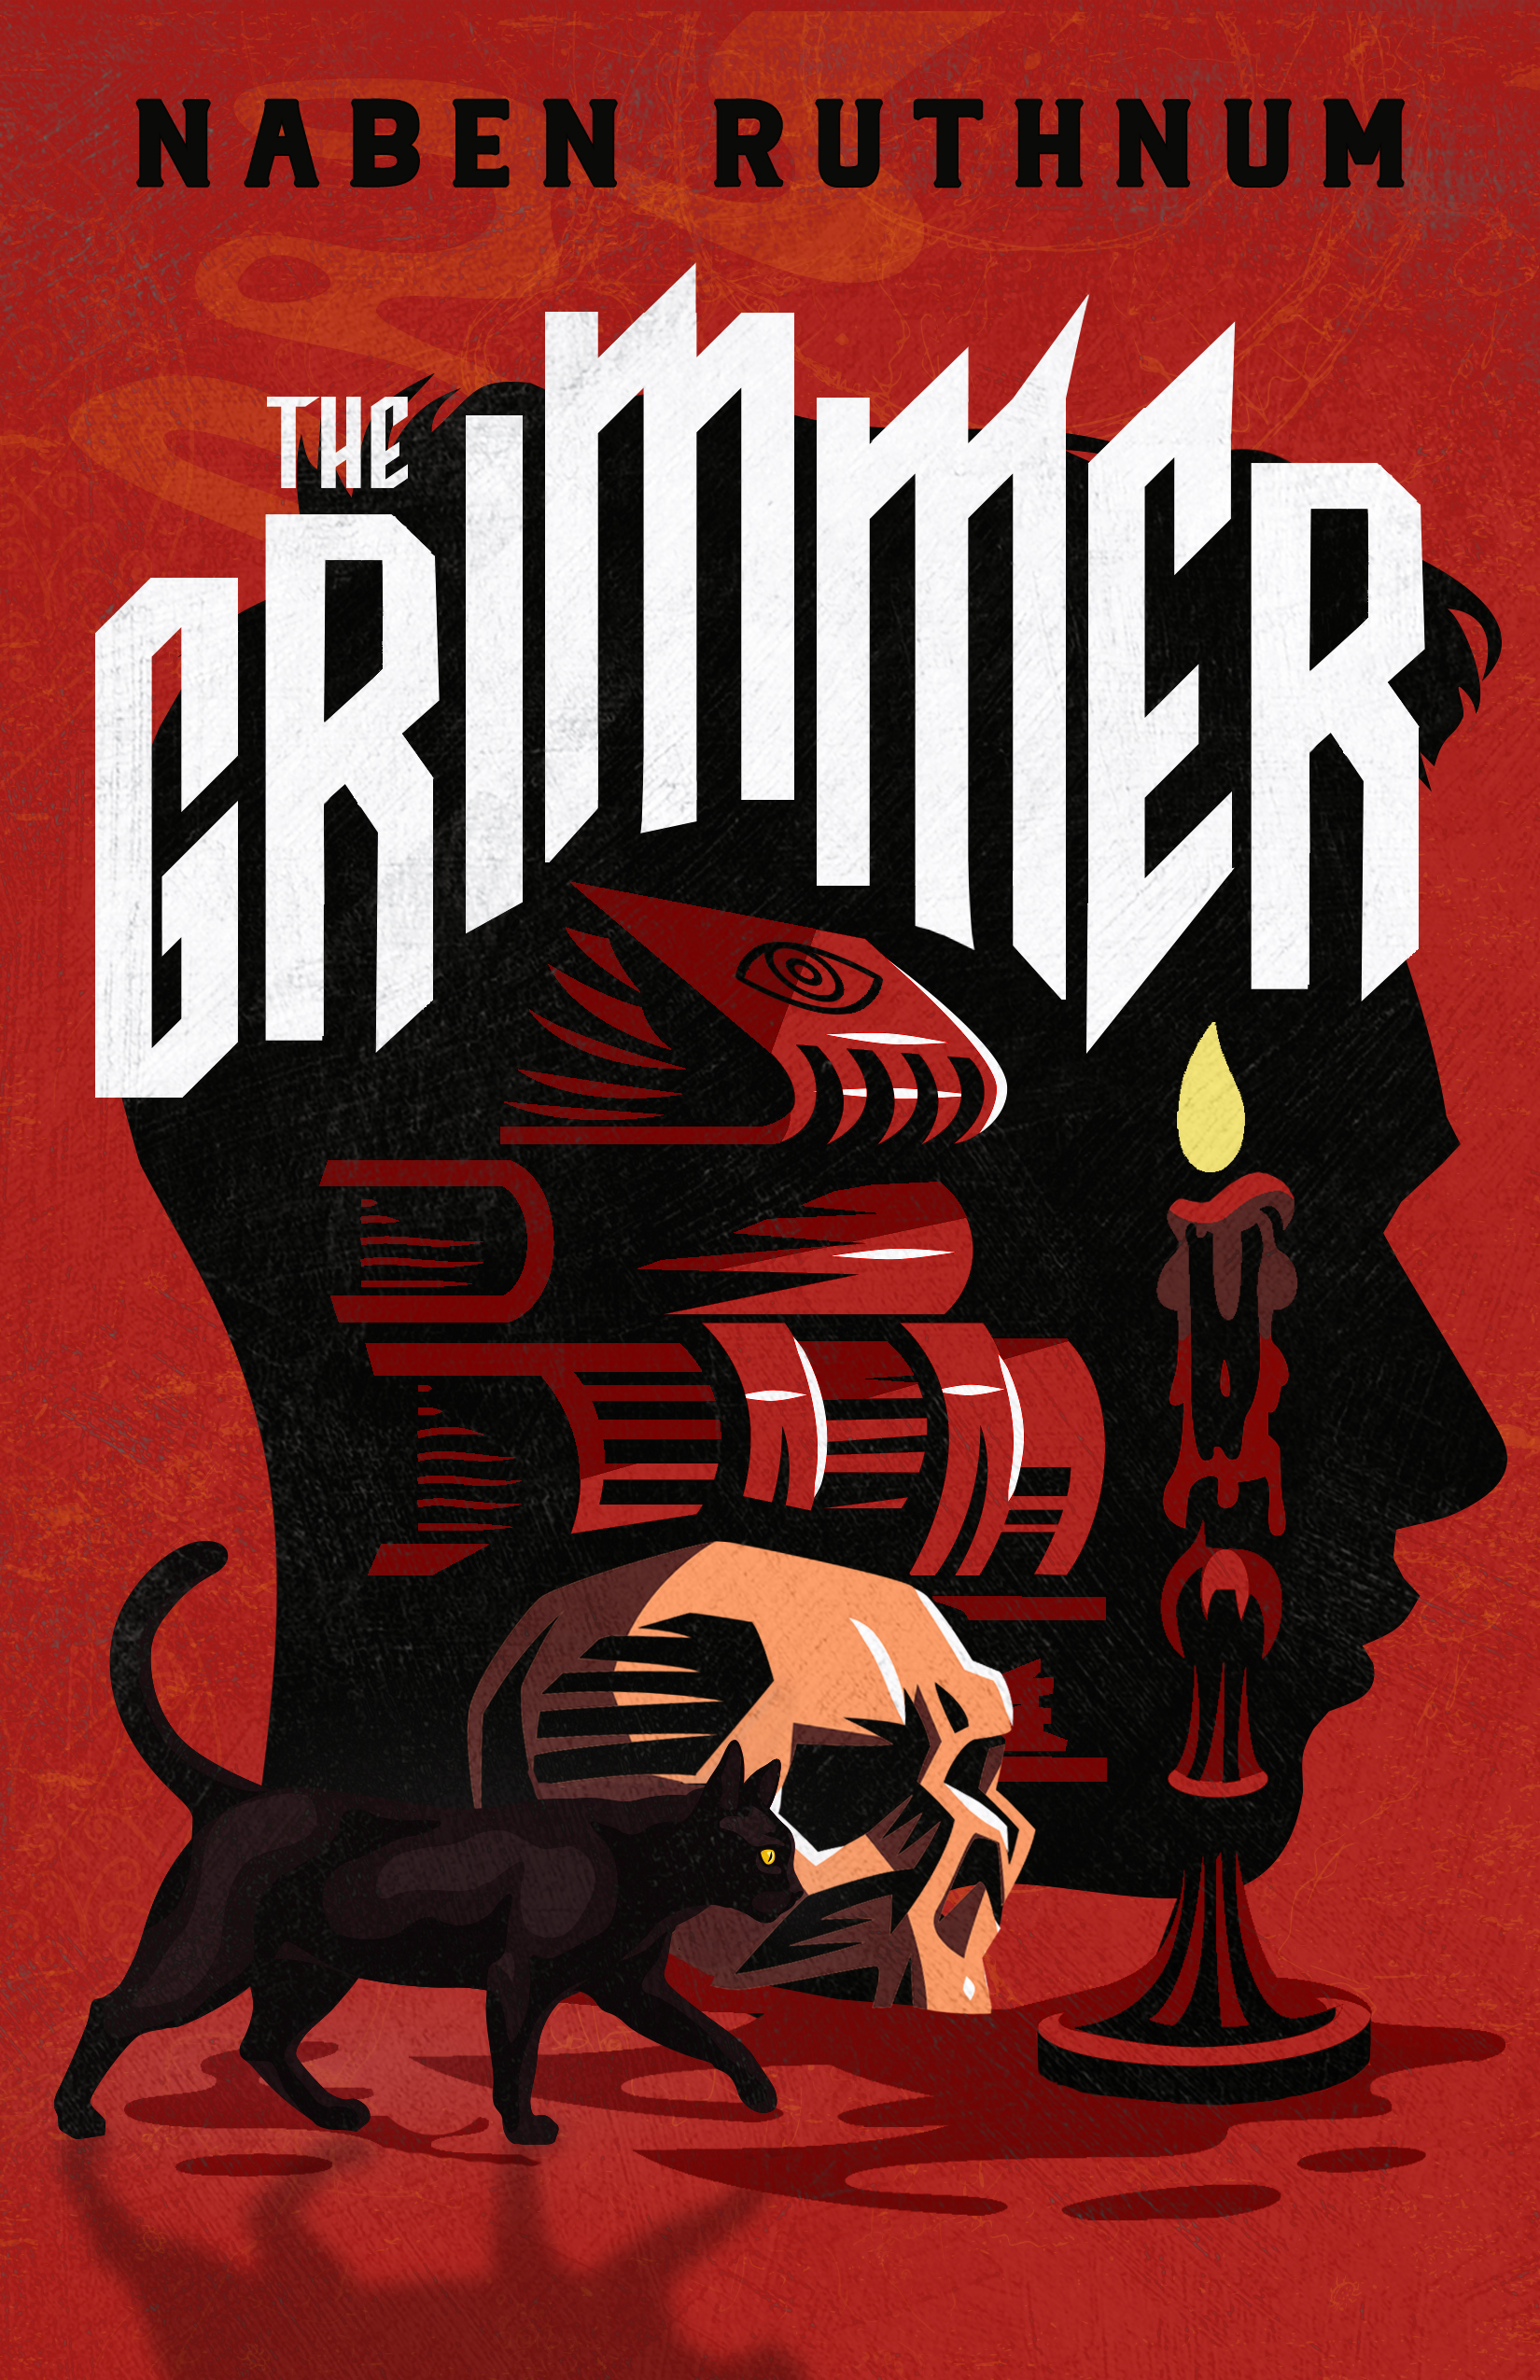 Grimmer, The